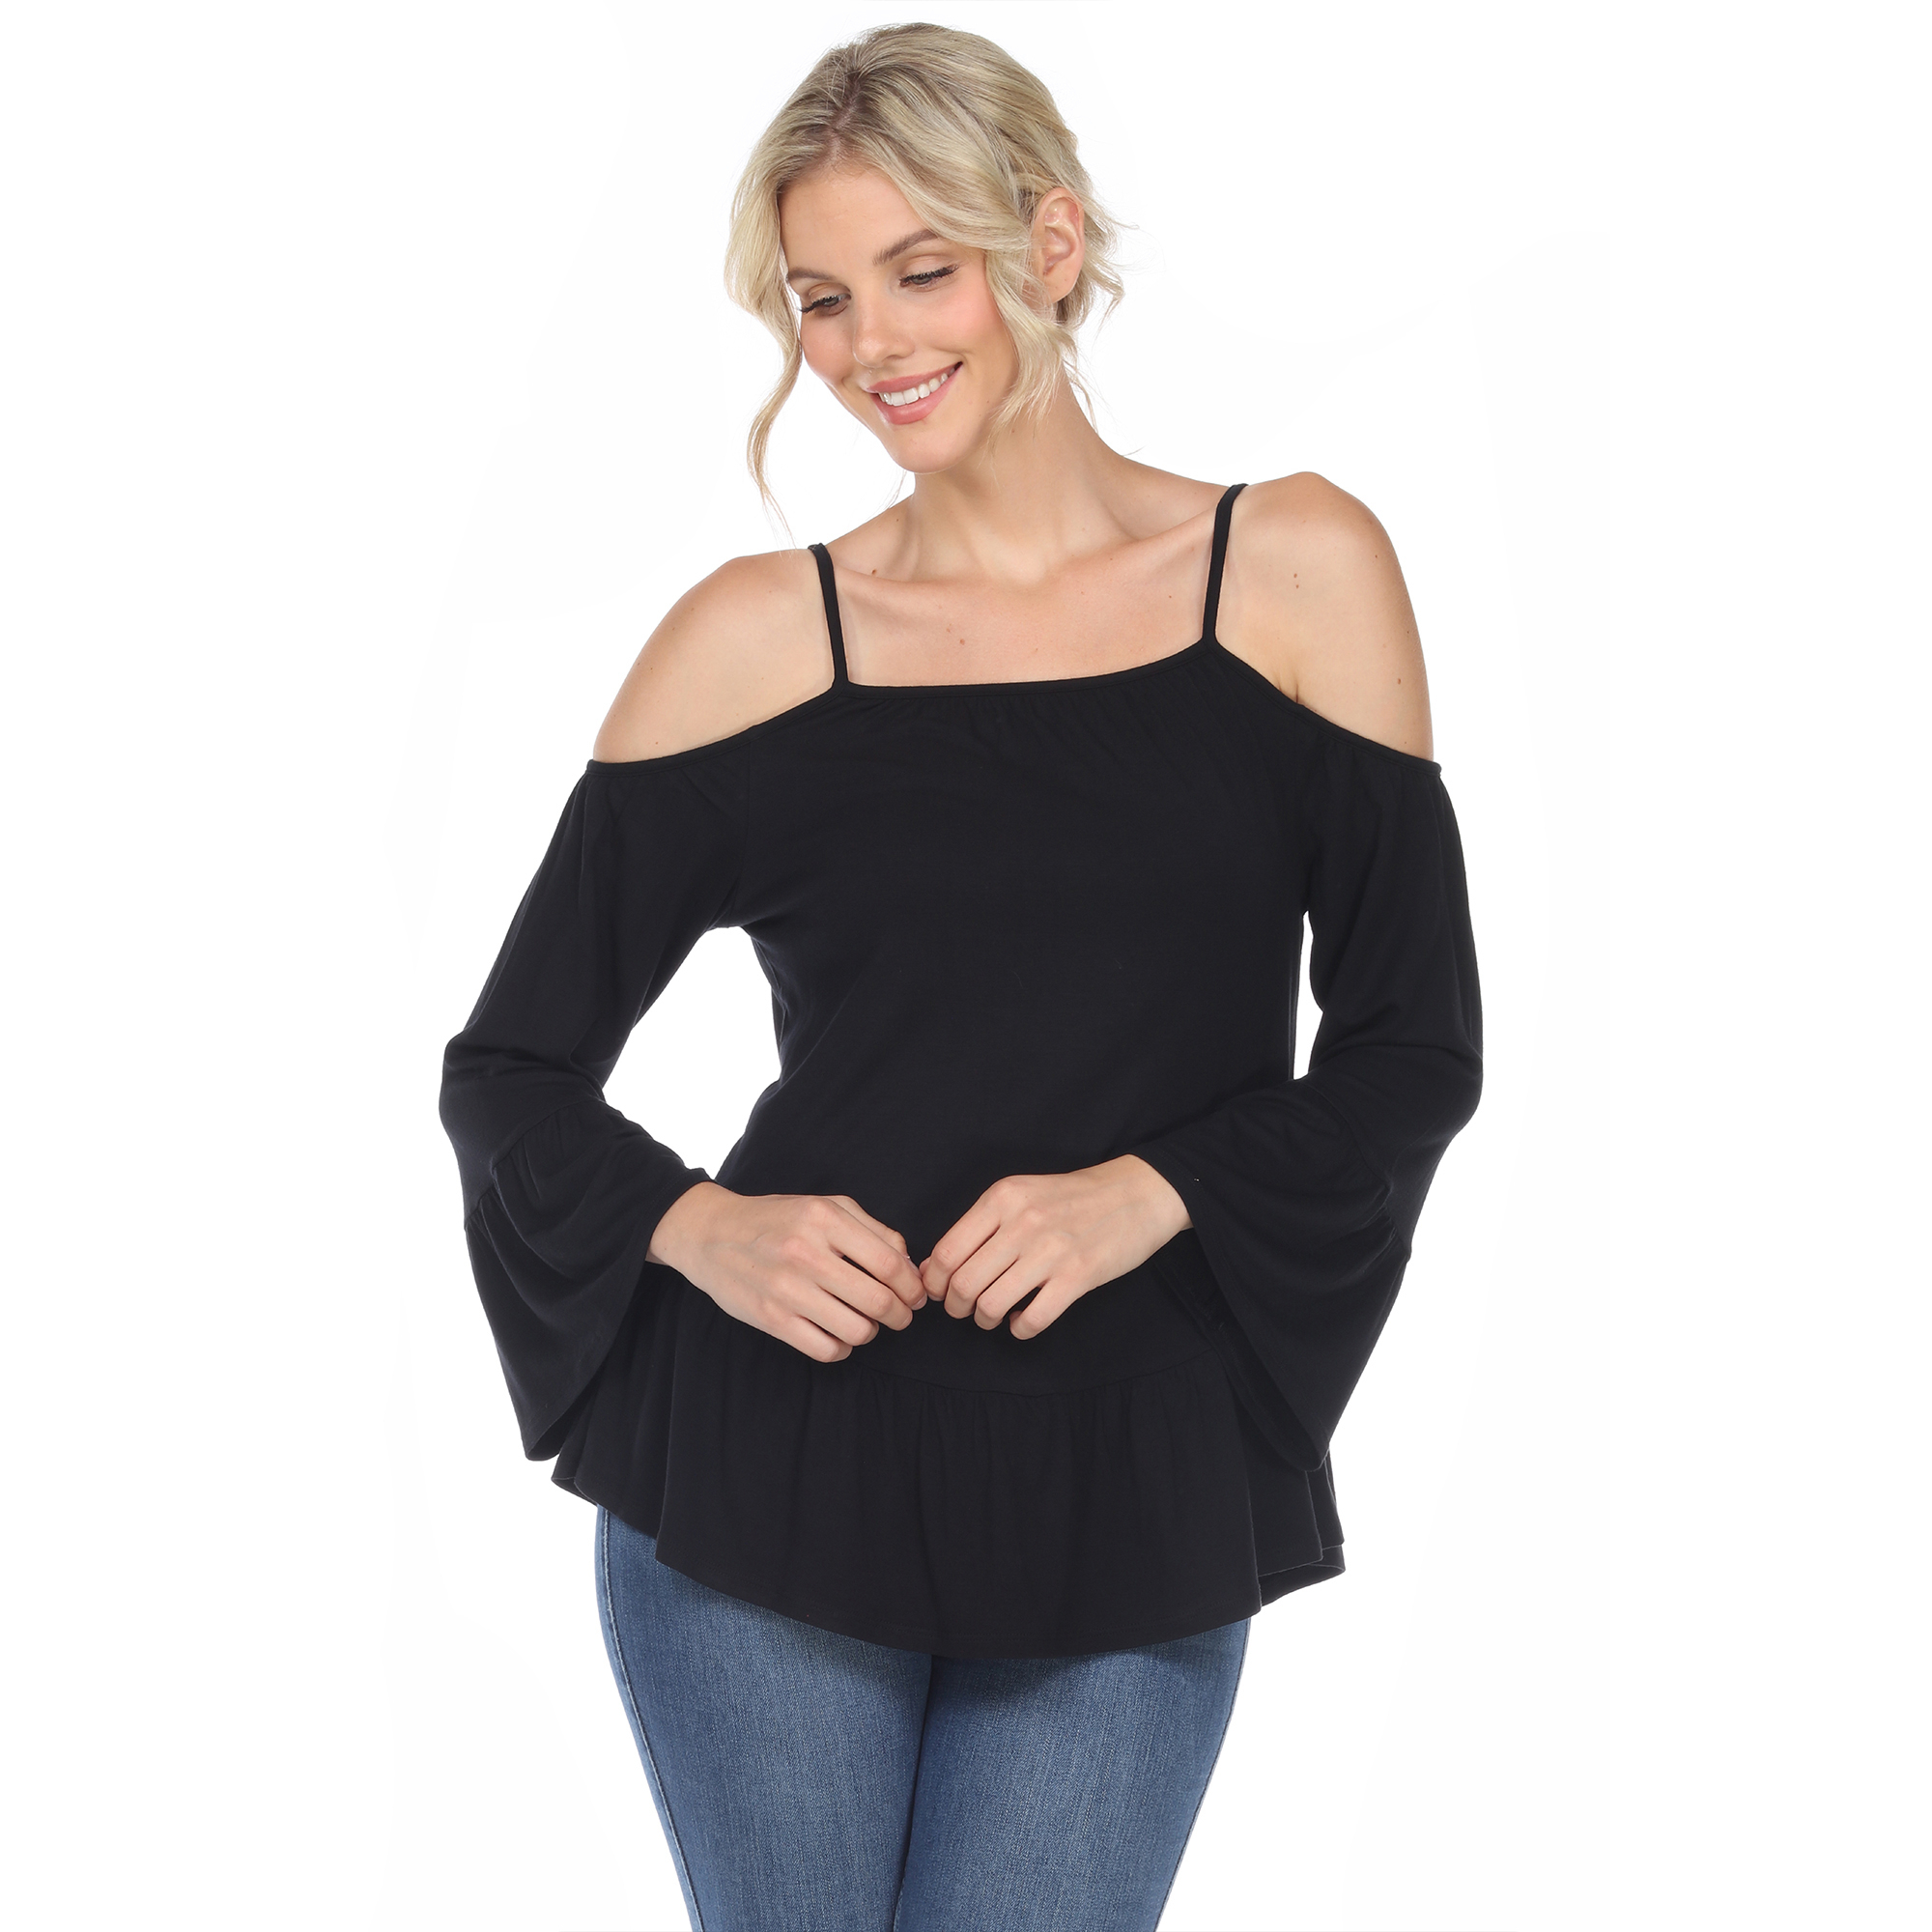 White Mark Women's Cold Shoulder Ruffle Sleeve Top - Black, Large